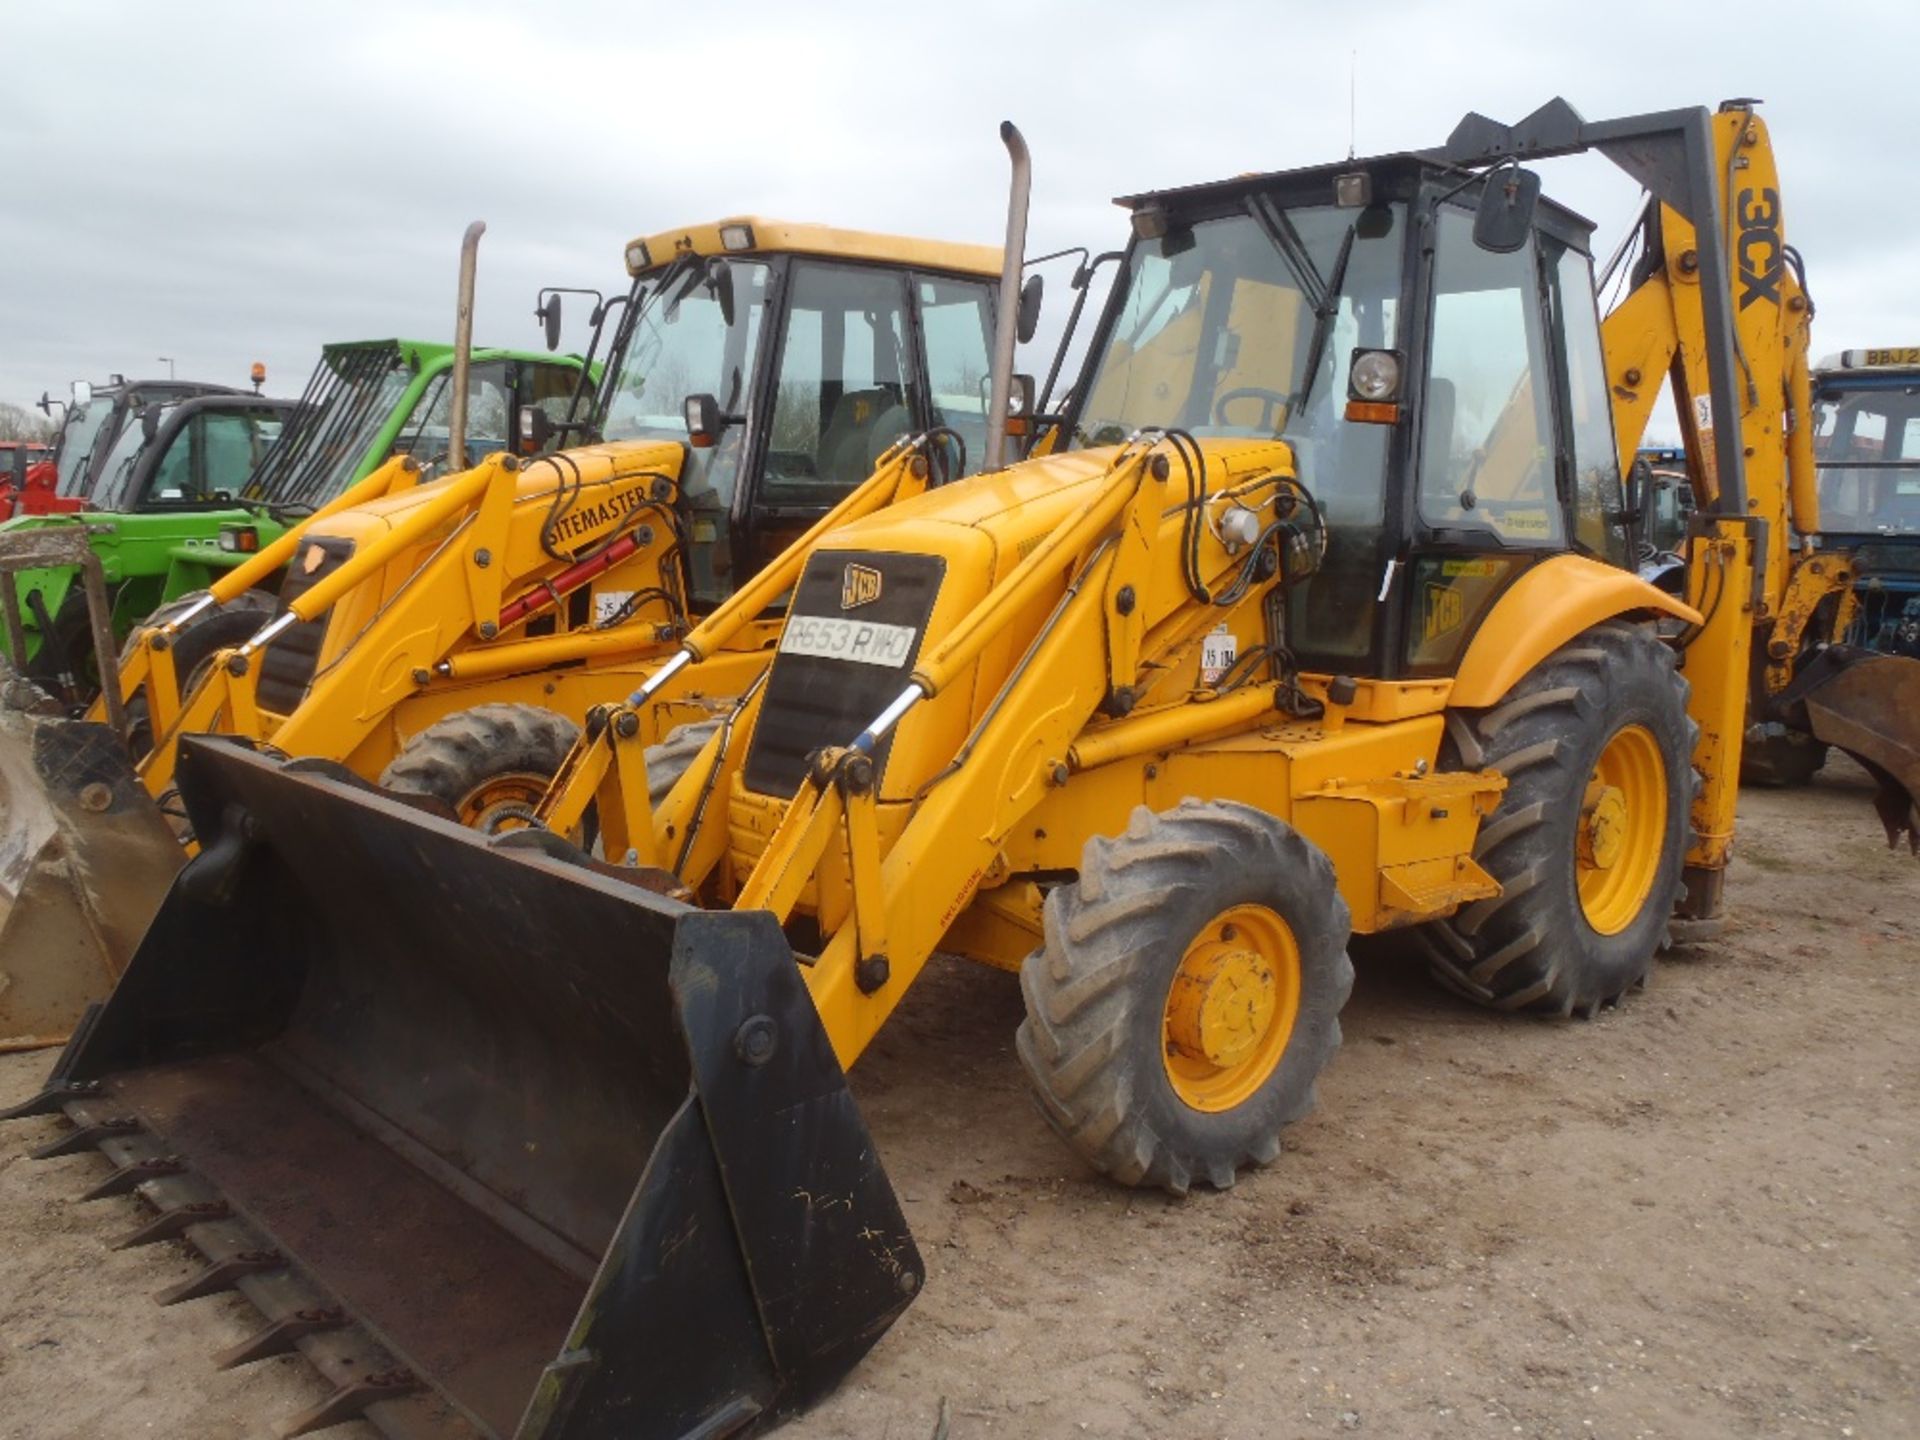 1998 JCB 3CX Manual Non Turbo With Pipework, Quick Fit Bucket. Hammer. V5 will be supplied. Ex